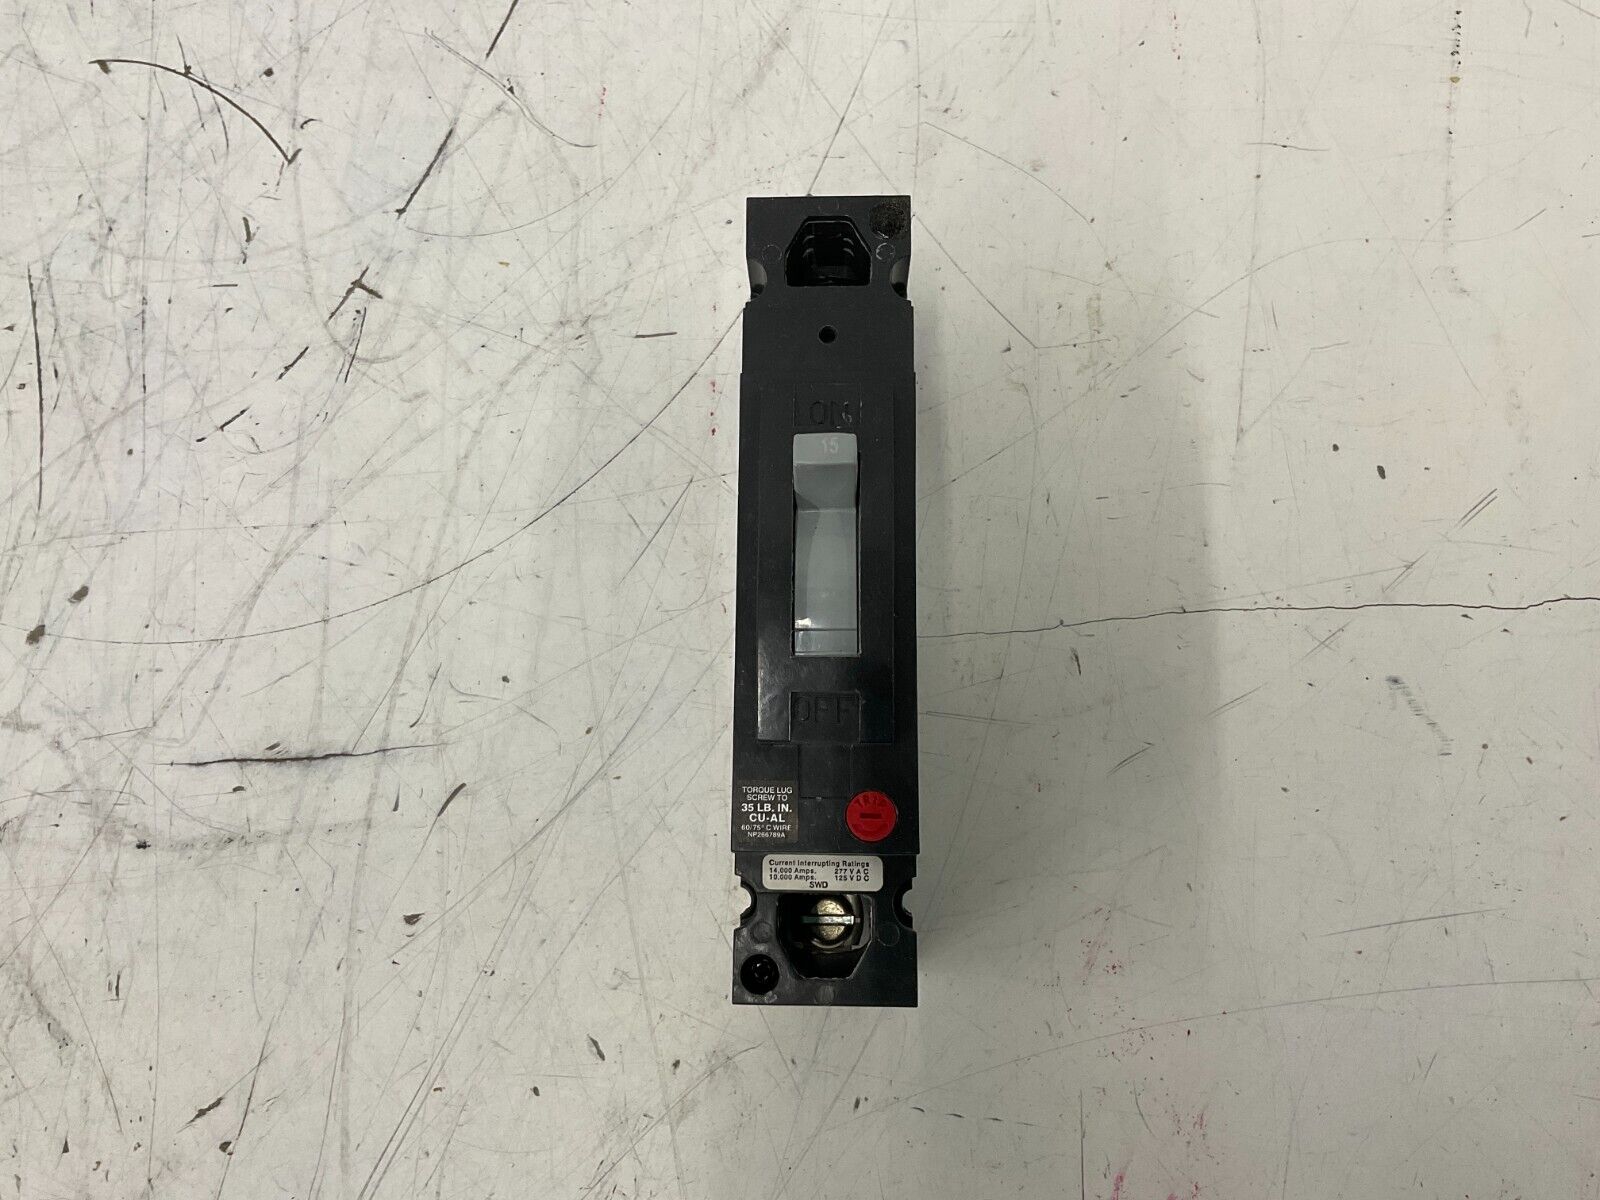 GE Industrial Molded Case Circuit Breaker TED113015WL 15 A Amps, 14kA at 120/240